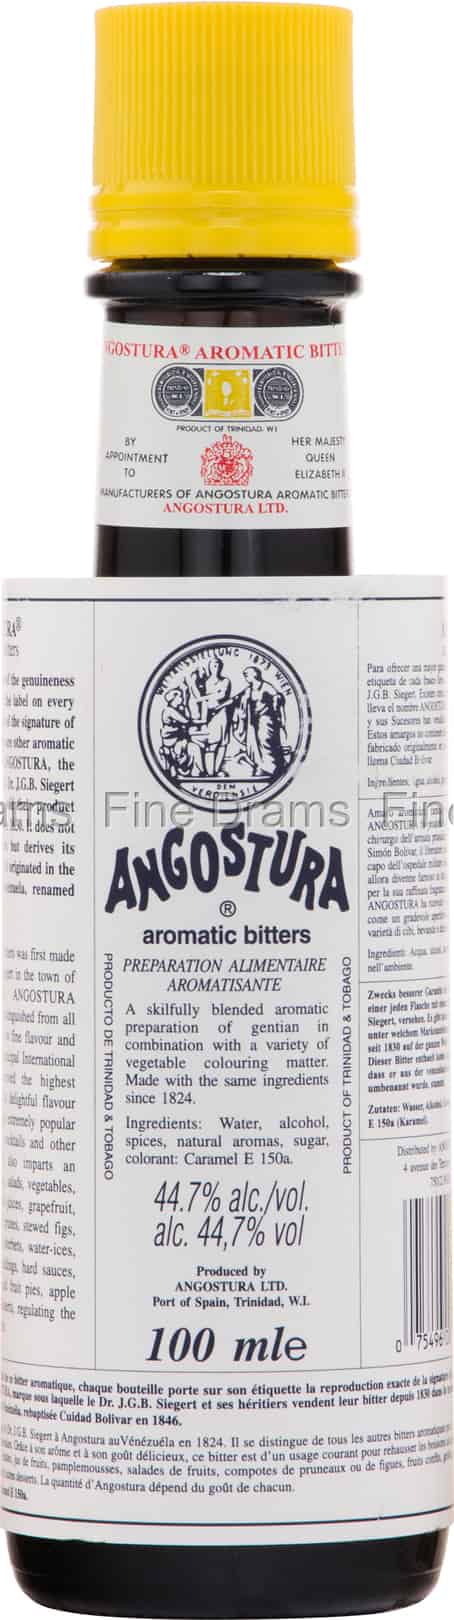 Angostura Aromatic Bitters (10 cl)